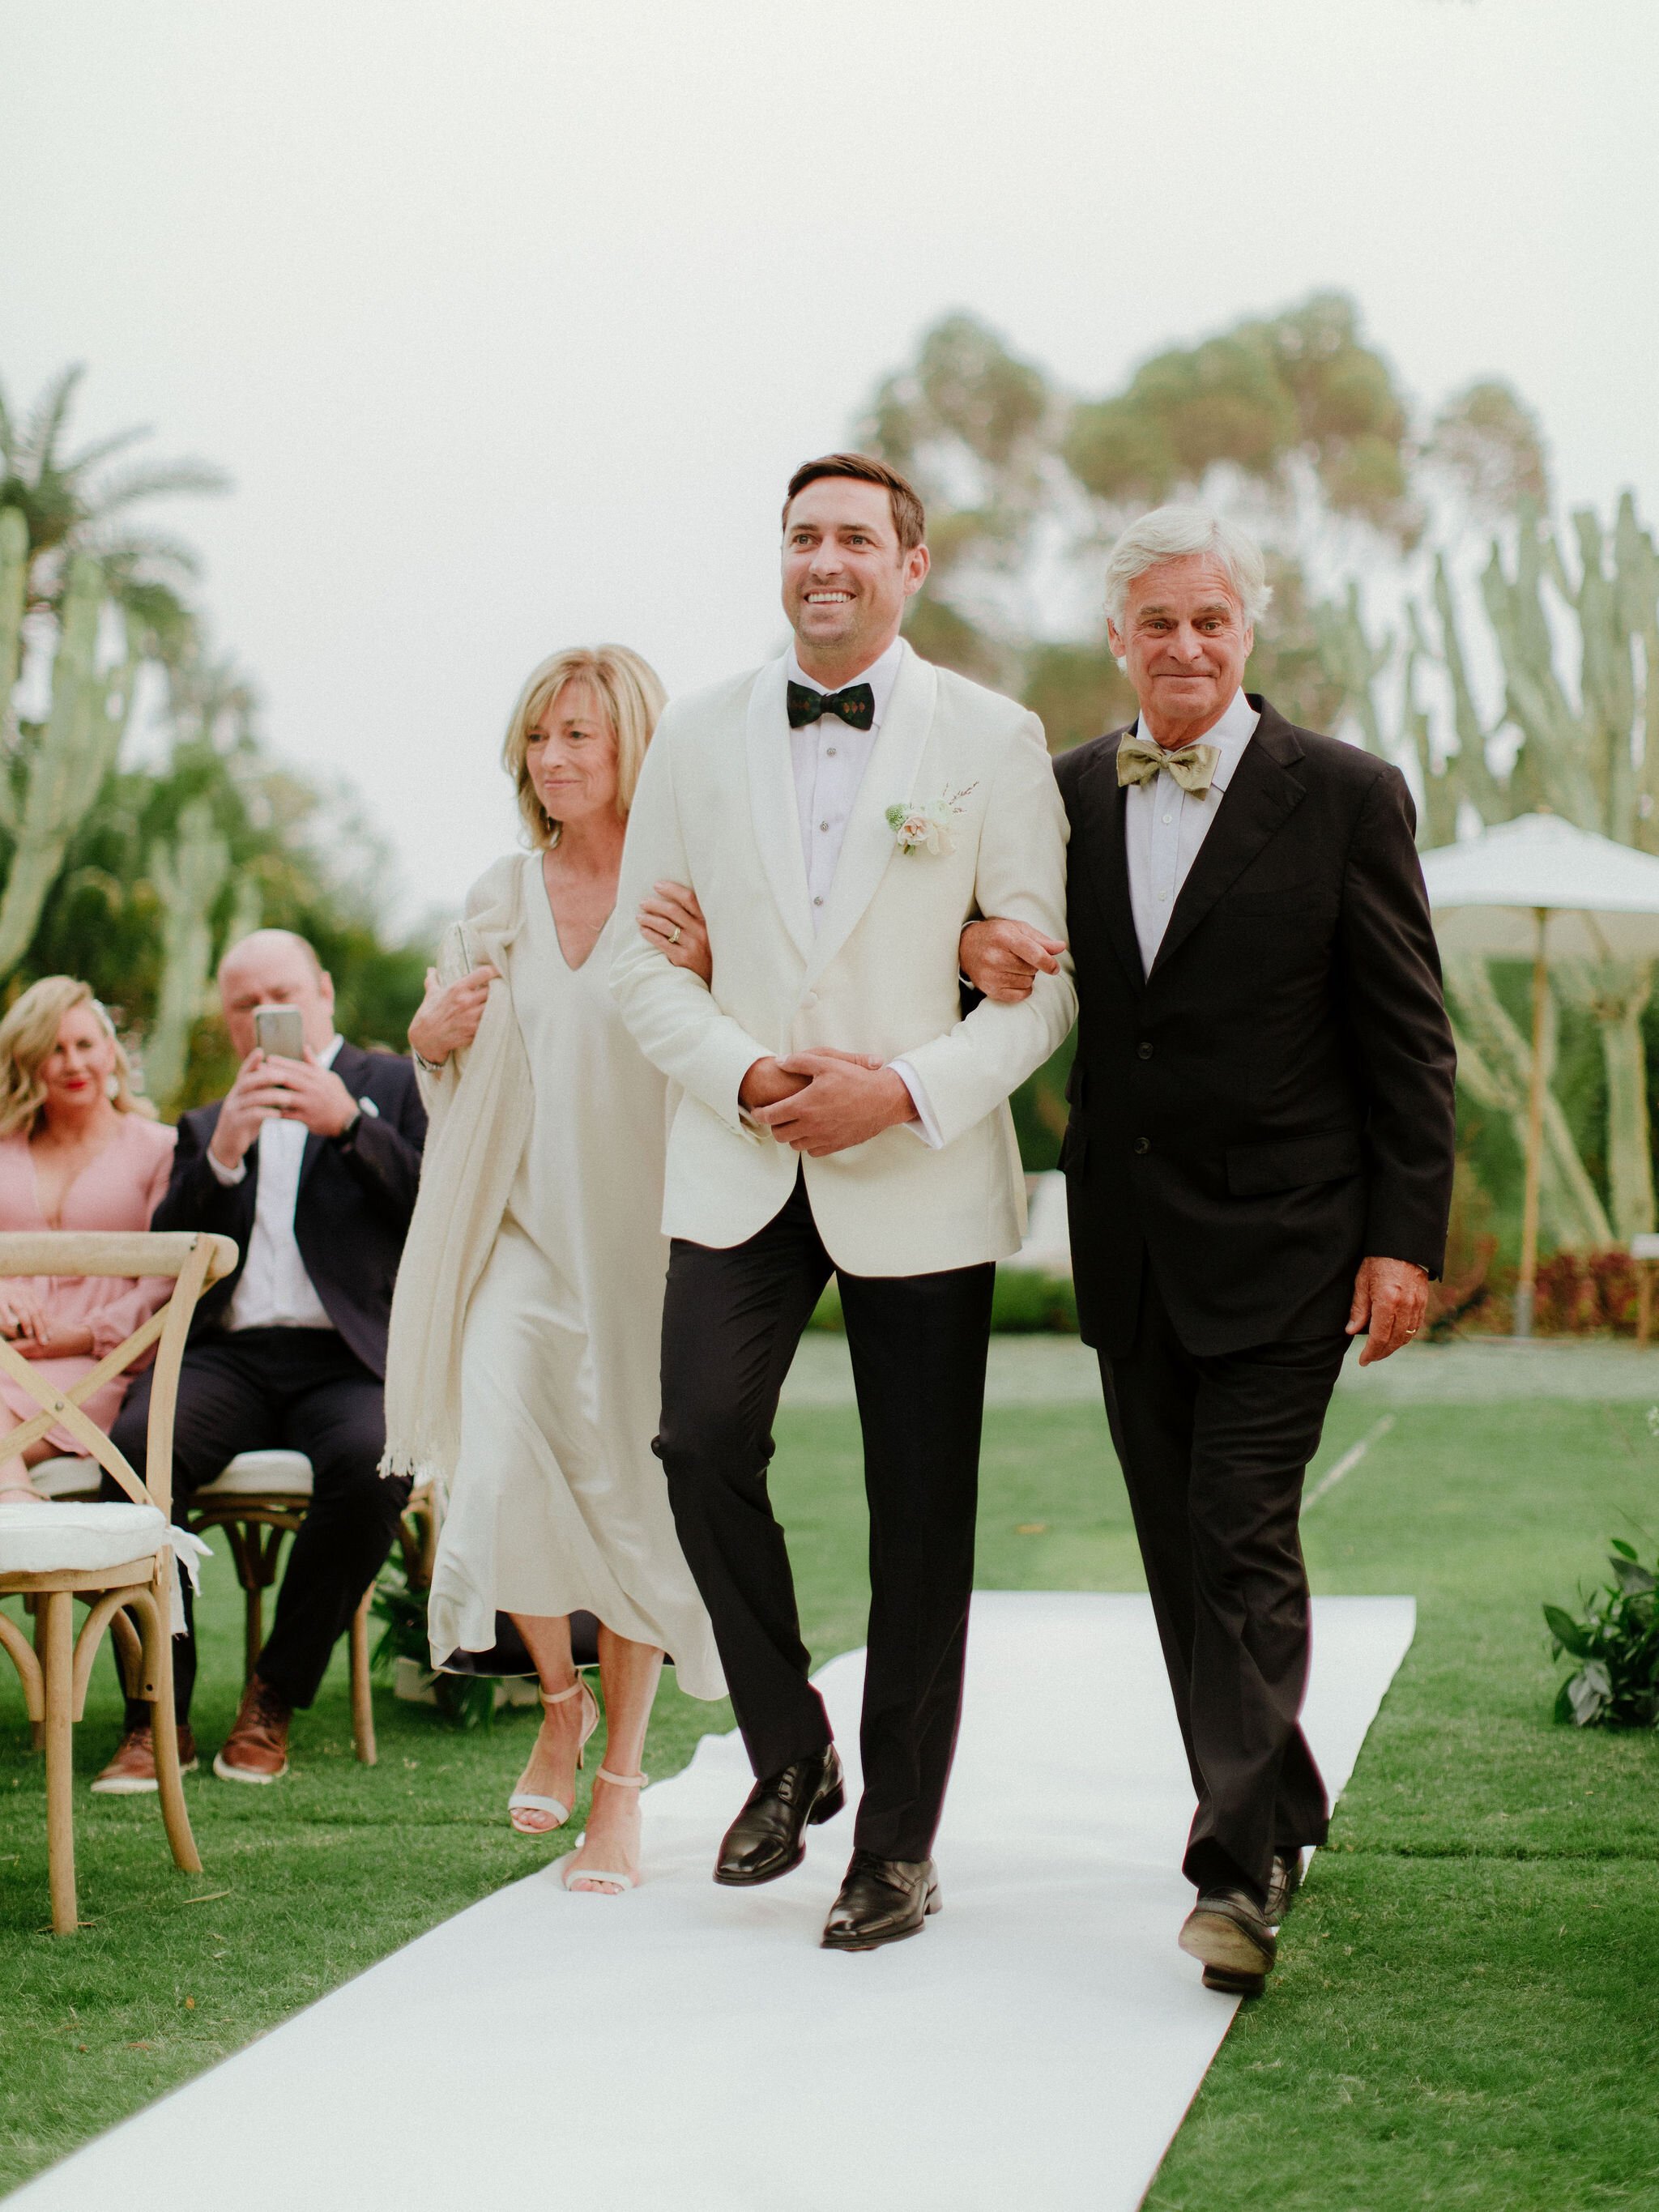 www.santabarbaraweddings.com | Chris J. Evans | Private Residence | Ashley Chanel Events | Rogue &amp; Fox | Groom Walking Down the Aisle with His Parents